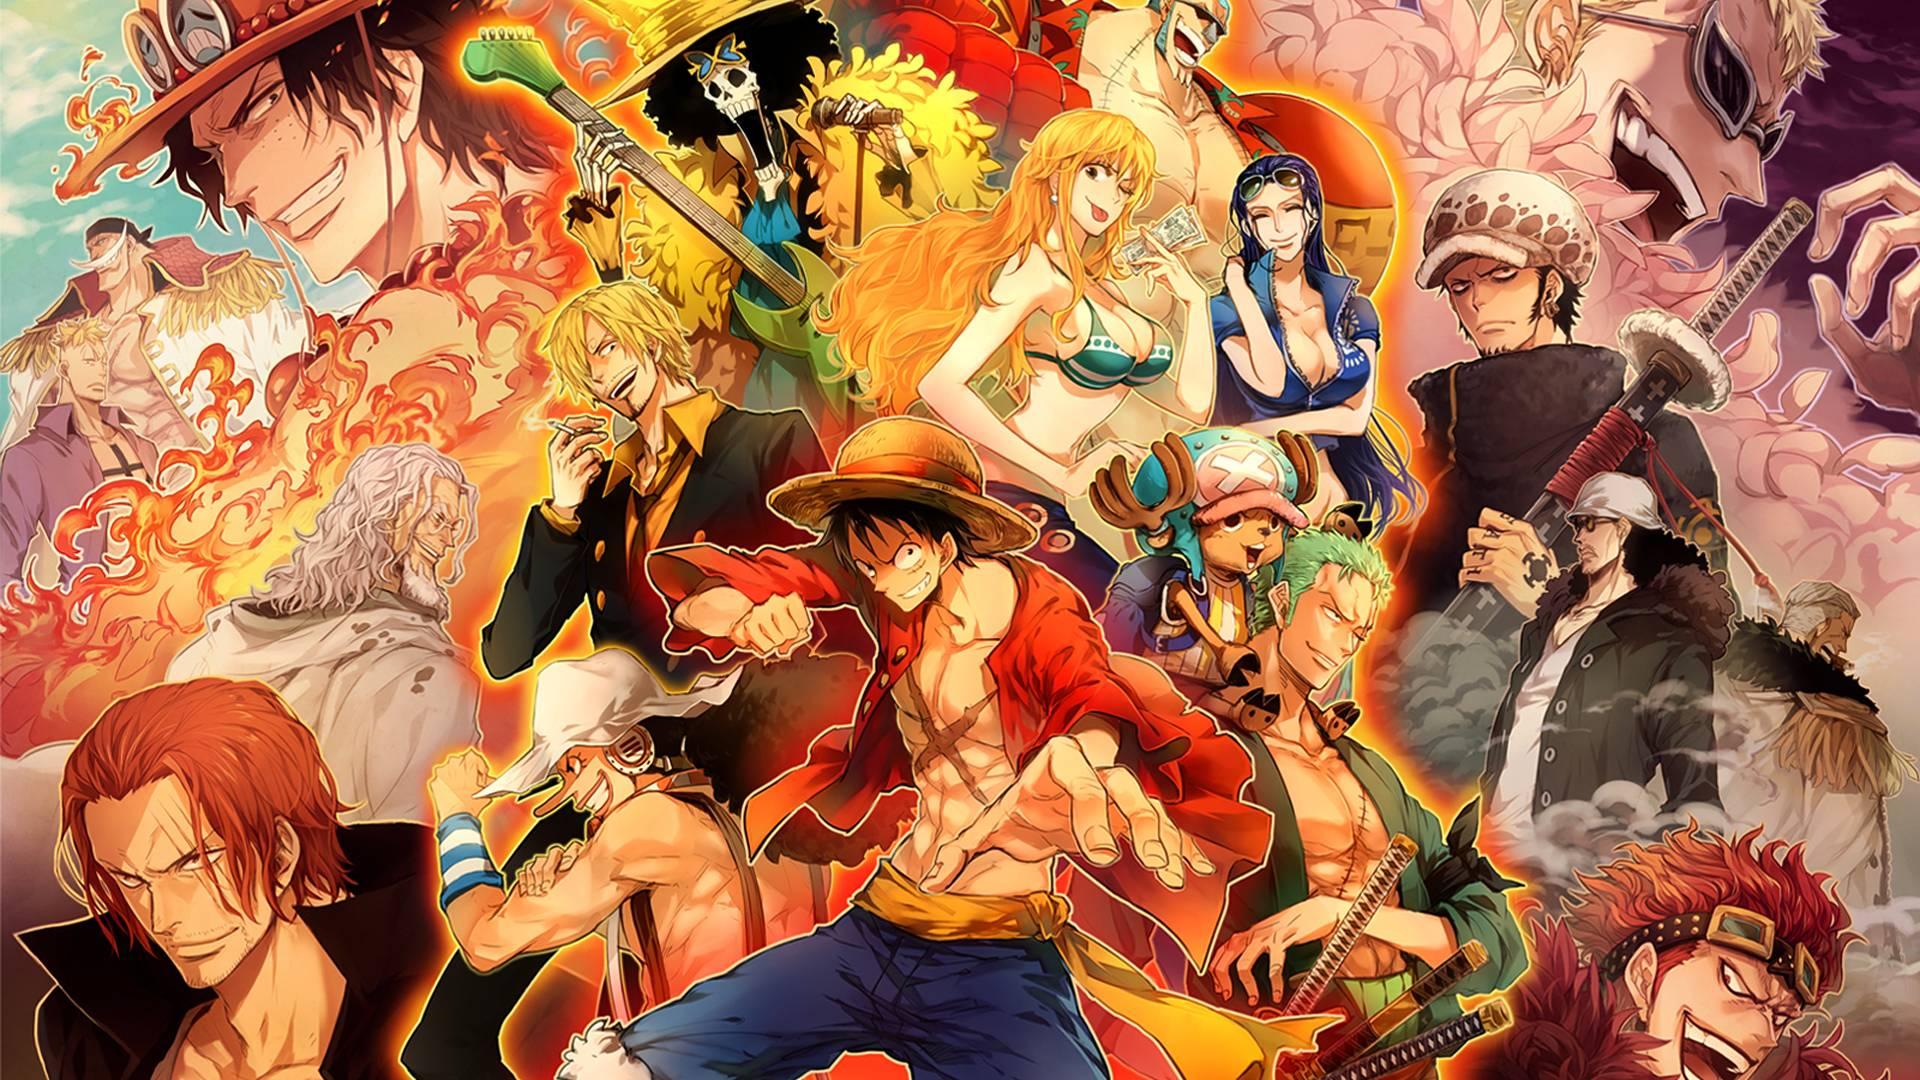 1920 x 1080 · jpeg - One Piece Wallpapers 2015 - Wallpaper Cave